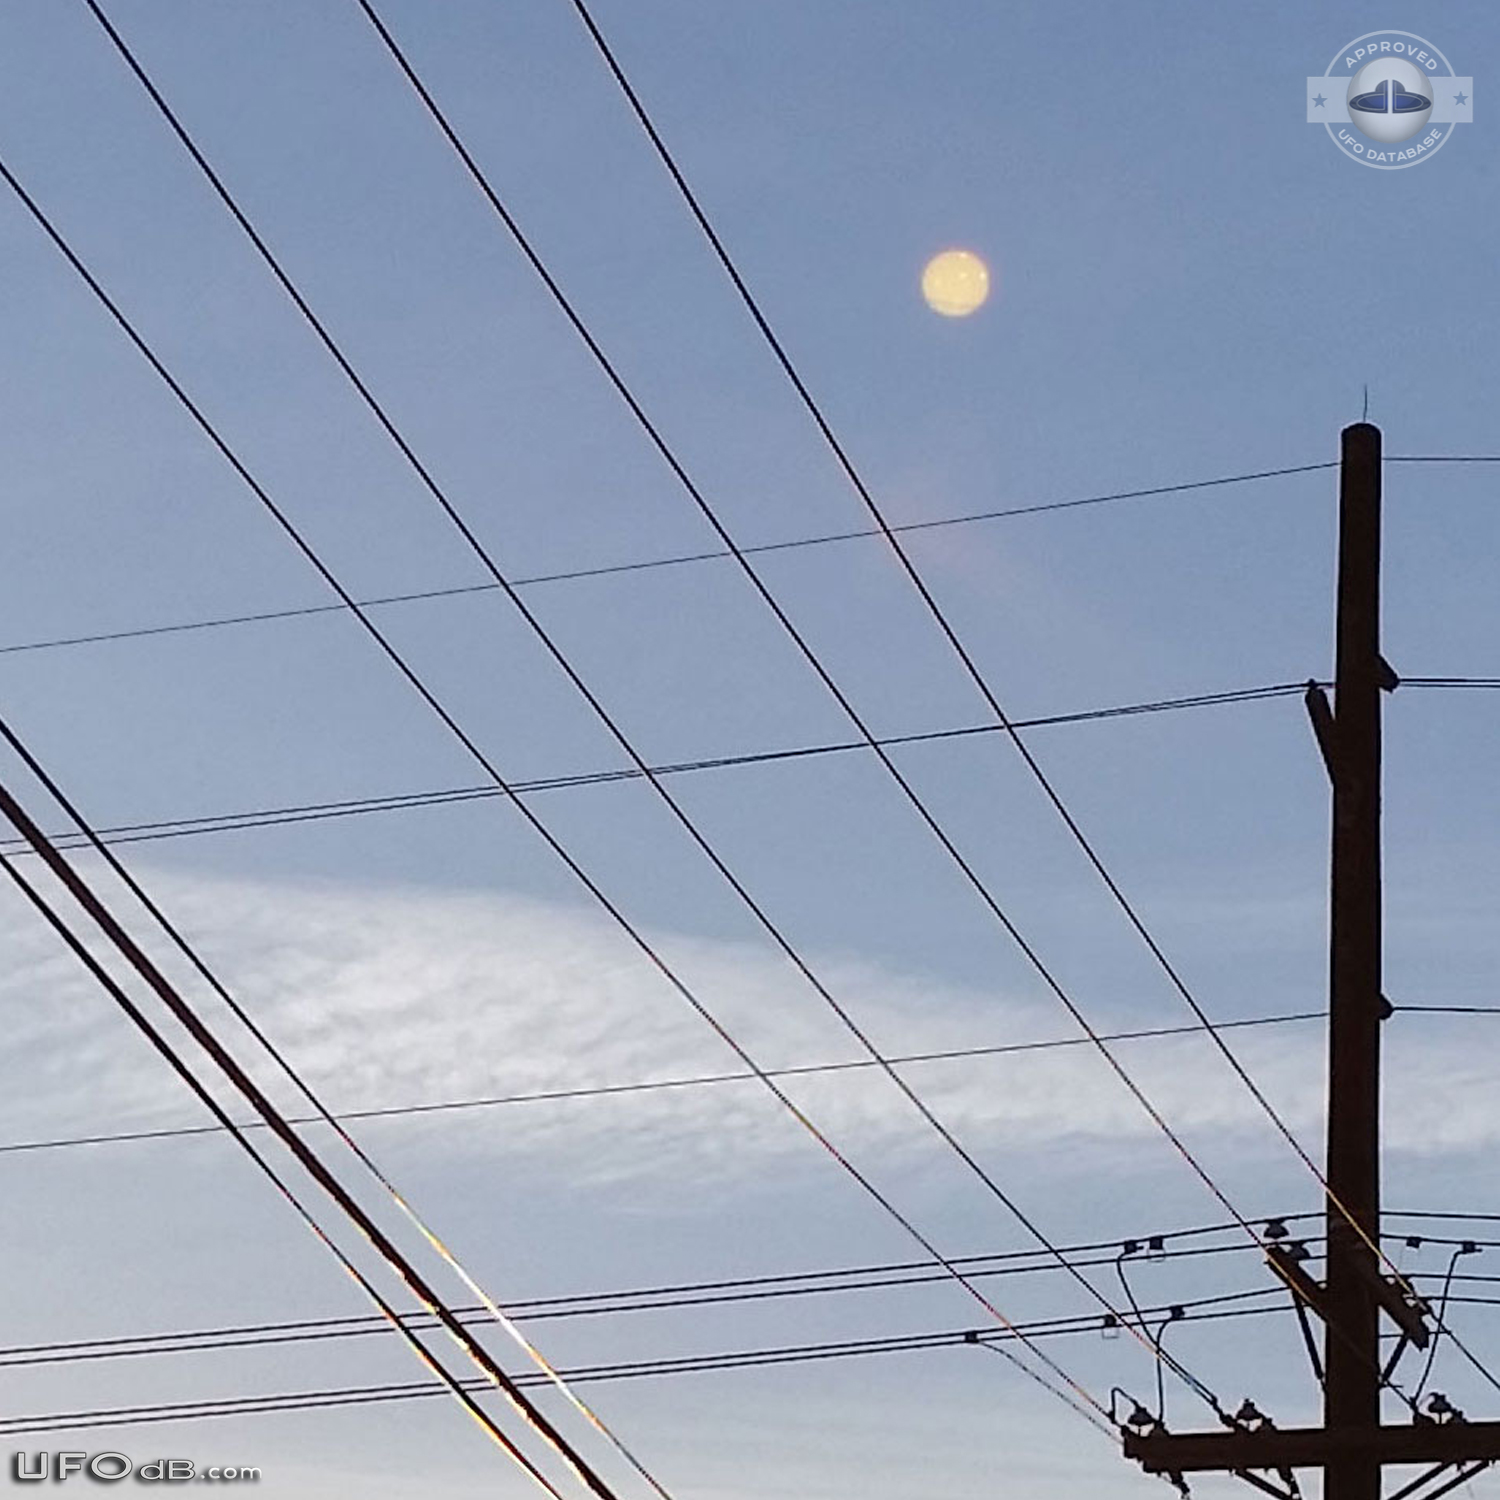 After feeling ET presence Orb UFO seen on Picture Salt Lake City 2015 UFO Picture #638-4